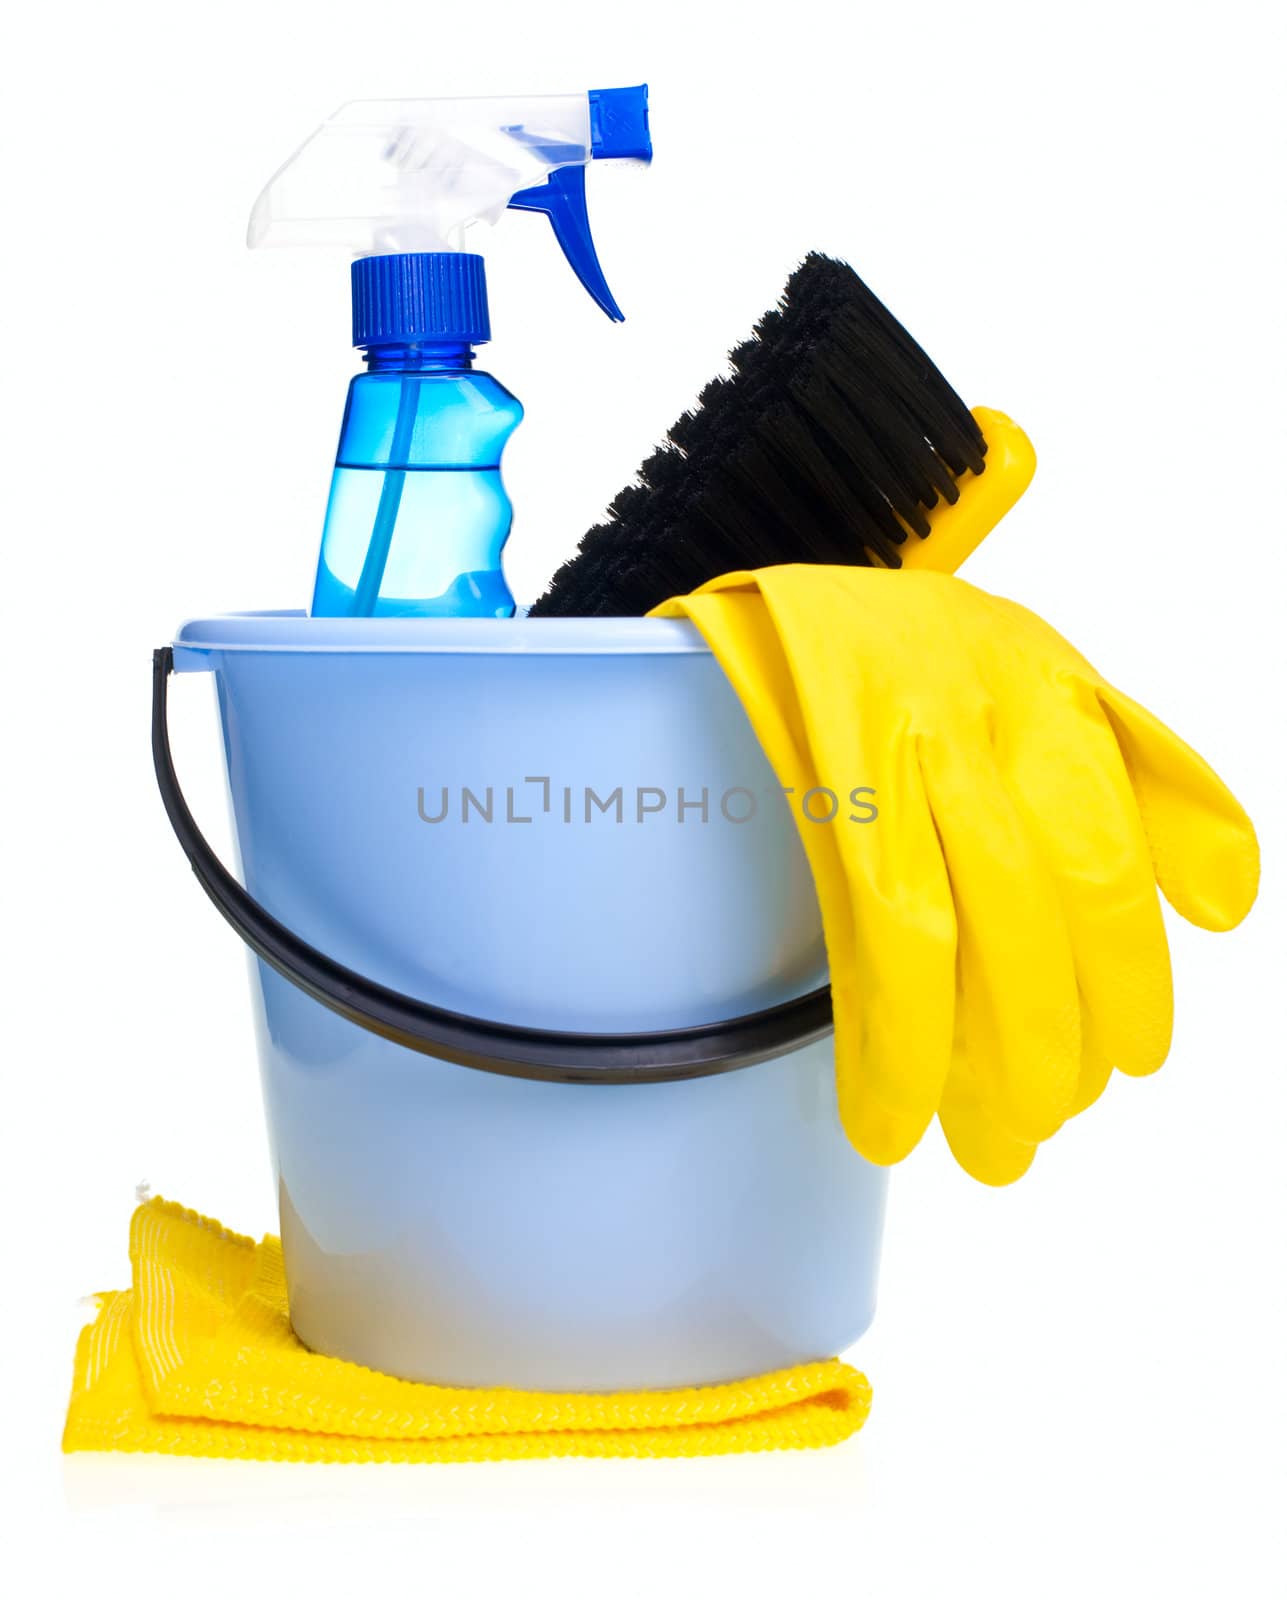 Plastic bucket with cleaning supplies on white background